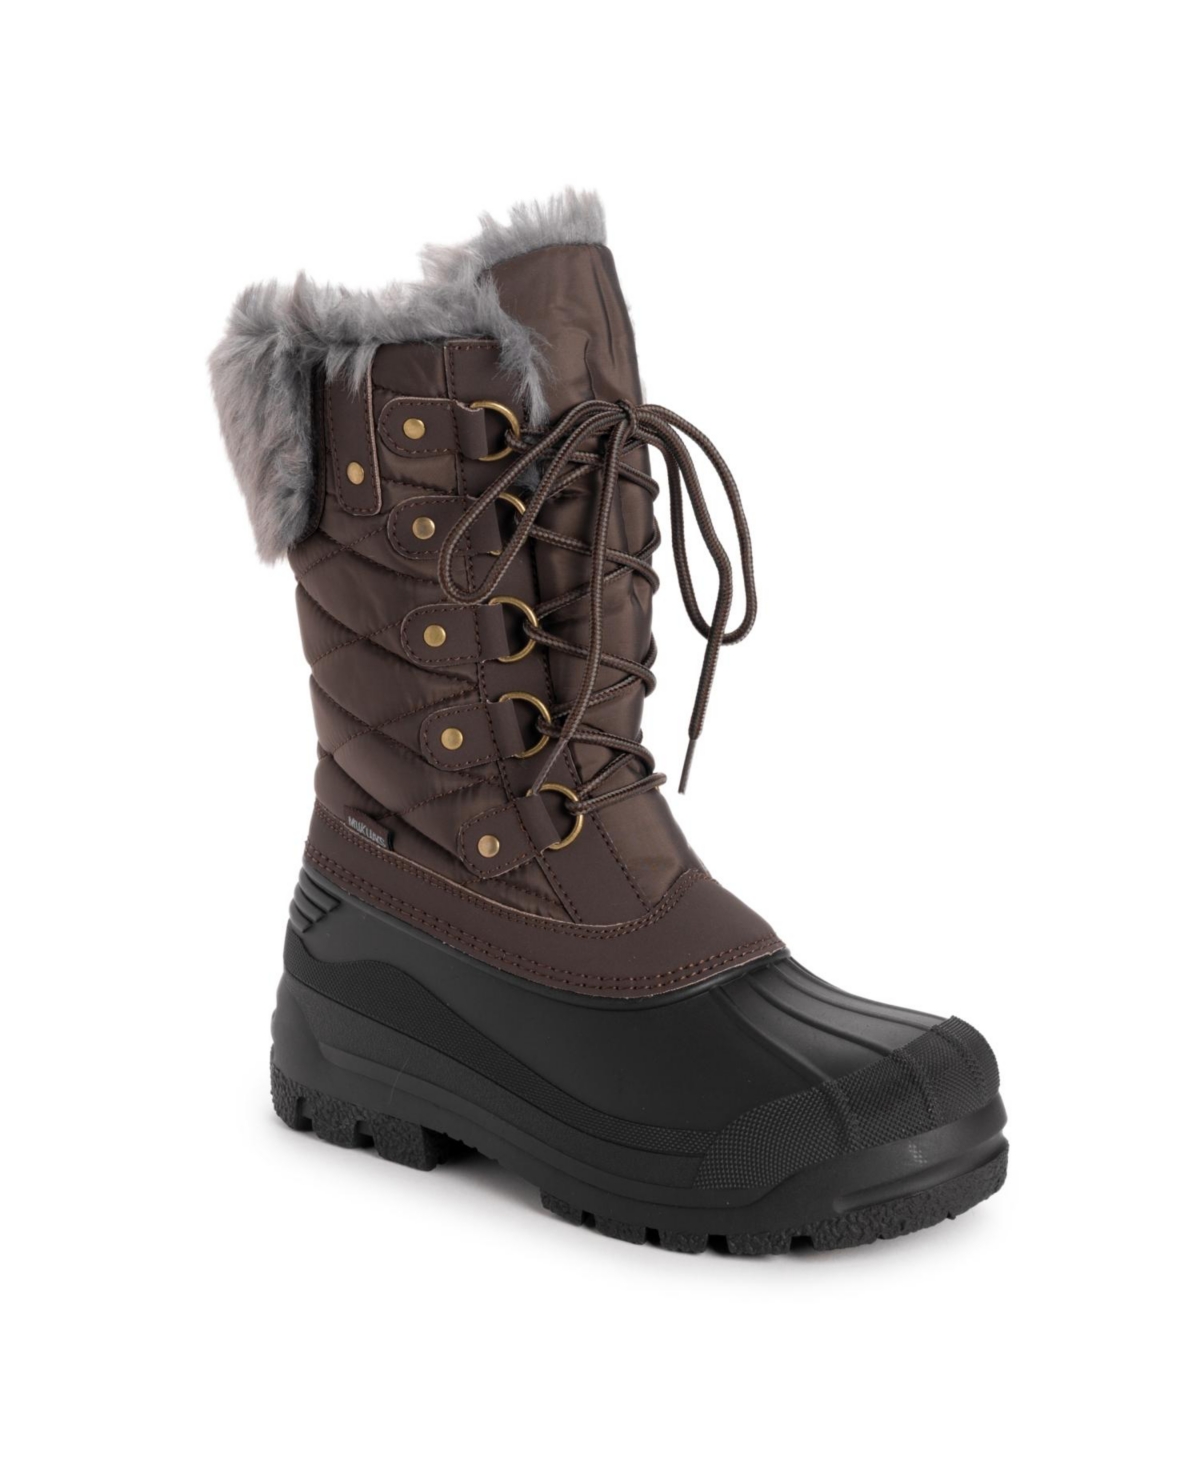 Women's Palmer Paige Boots - Chocolate